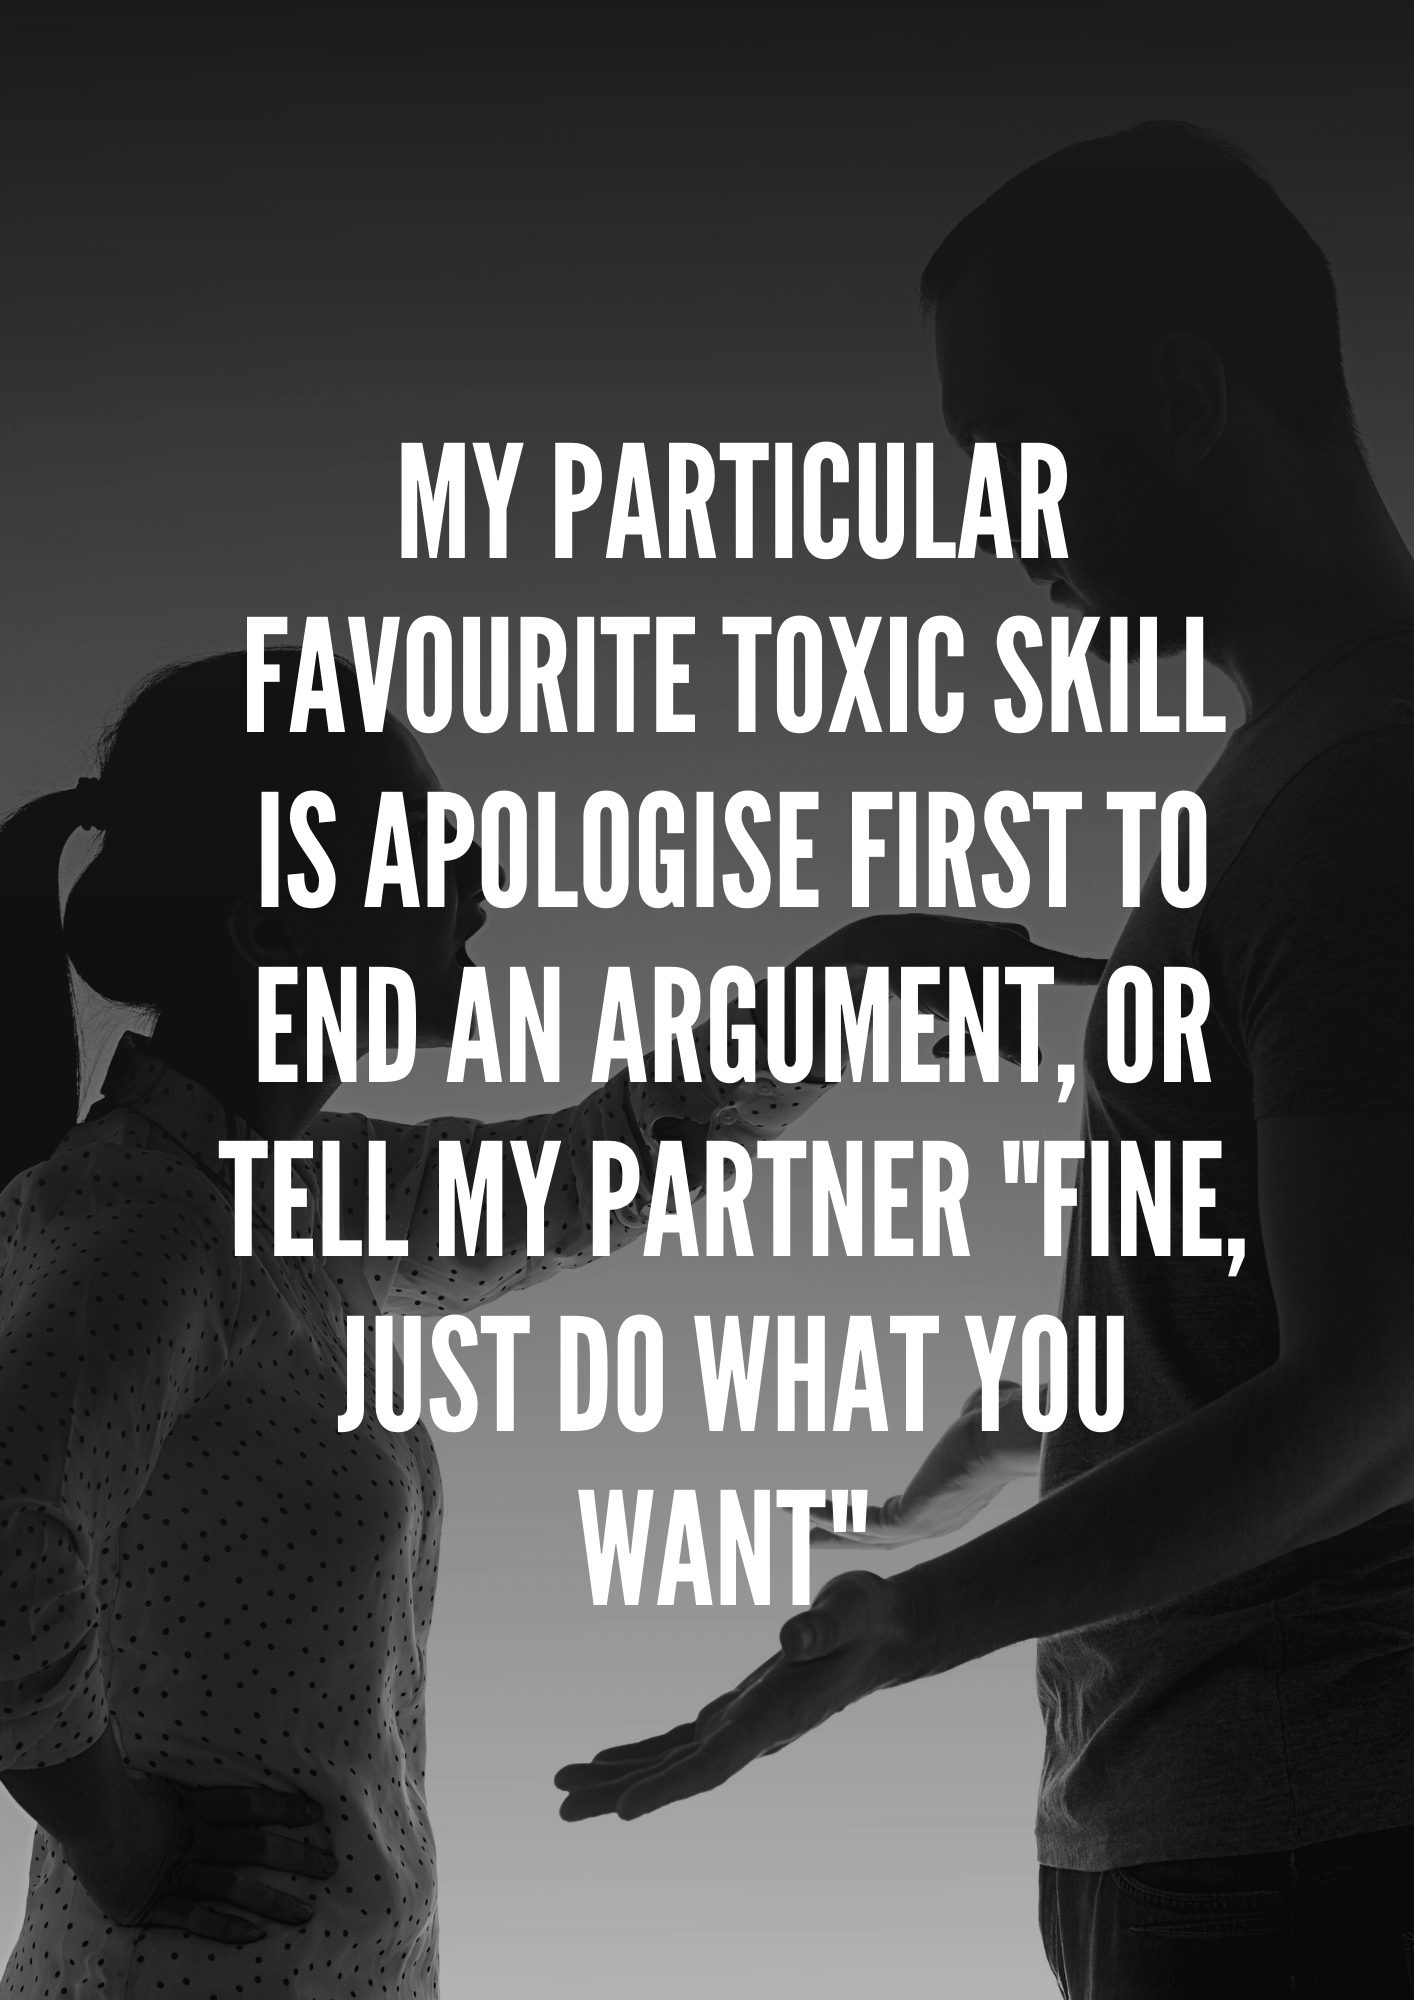 My particular favourite toxic skill is apologise first to end an argument, or tell my partner "Fine, just do what you want" 